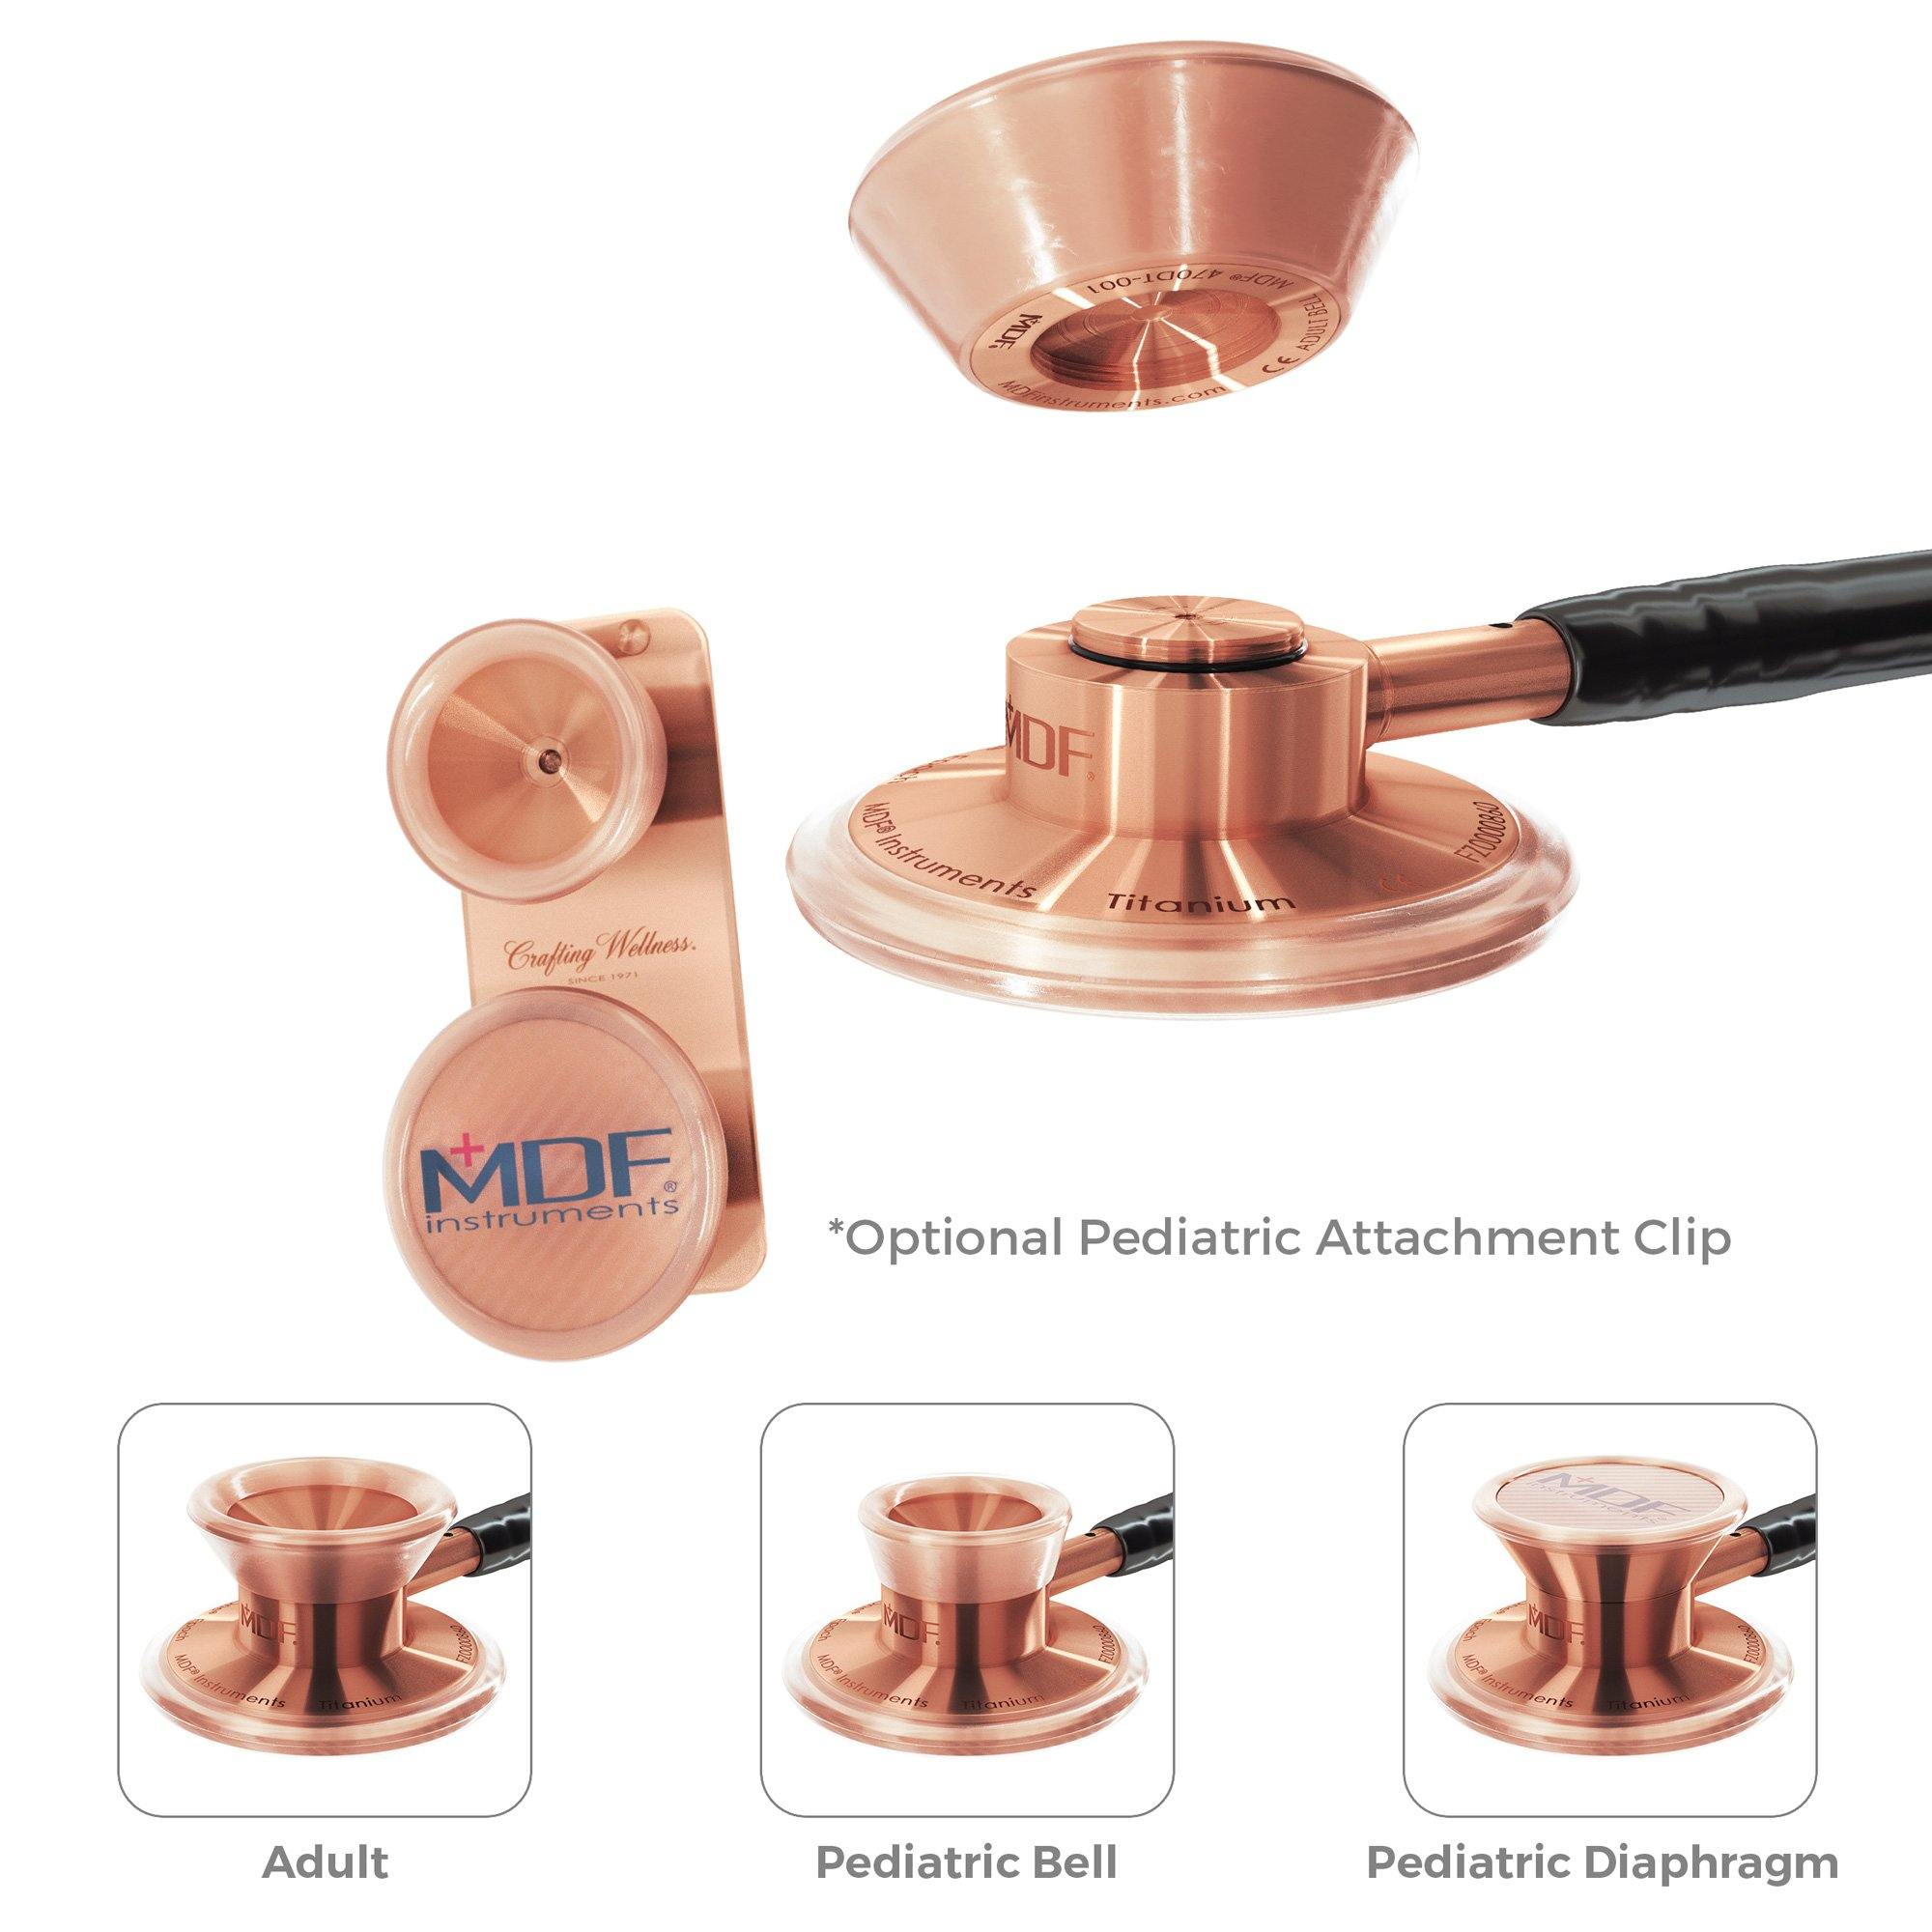 Stethoscope MDF Instruments MD One Epoch Titanium Mprint Flower Print Monet and Rose Gold Attachment Clips